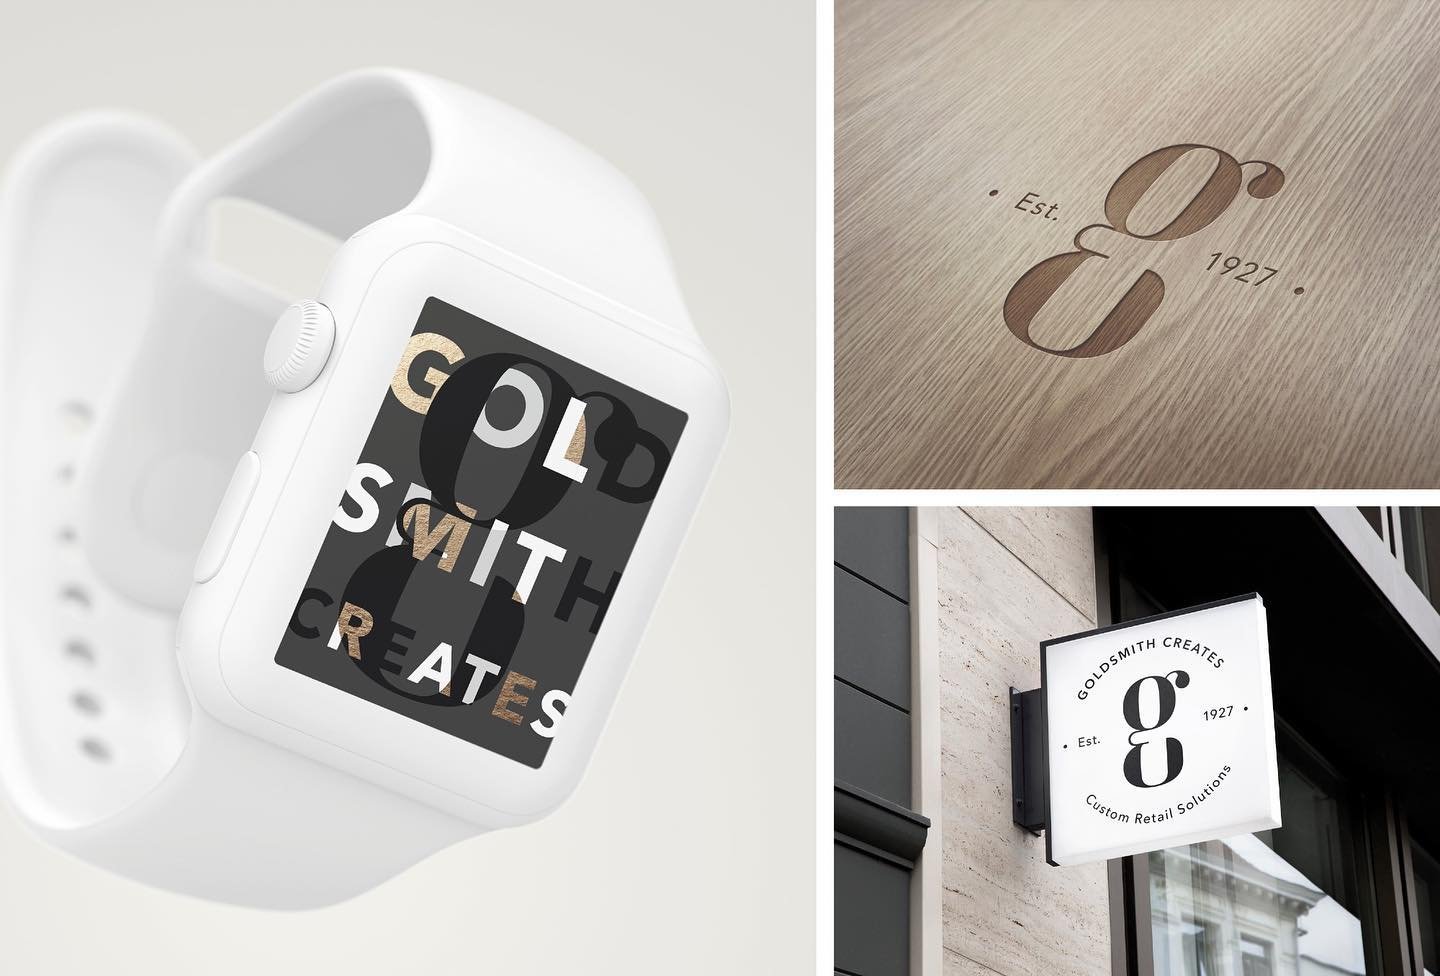 More from our latest project for @goldsmithcreates #branddesign